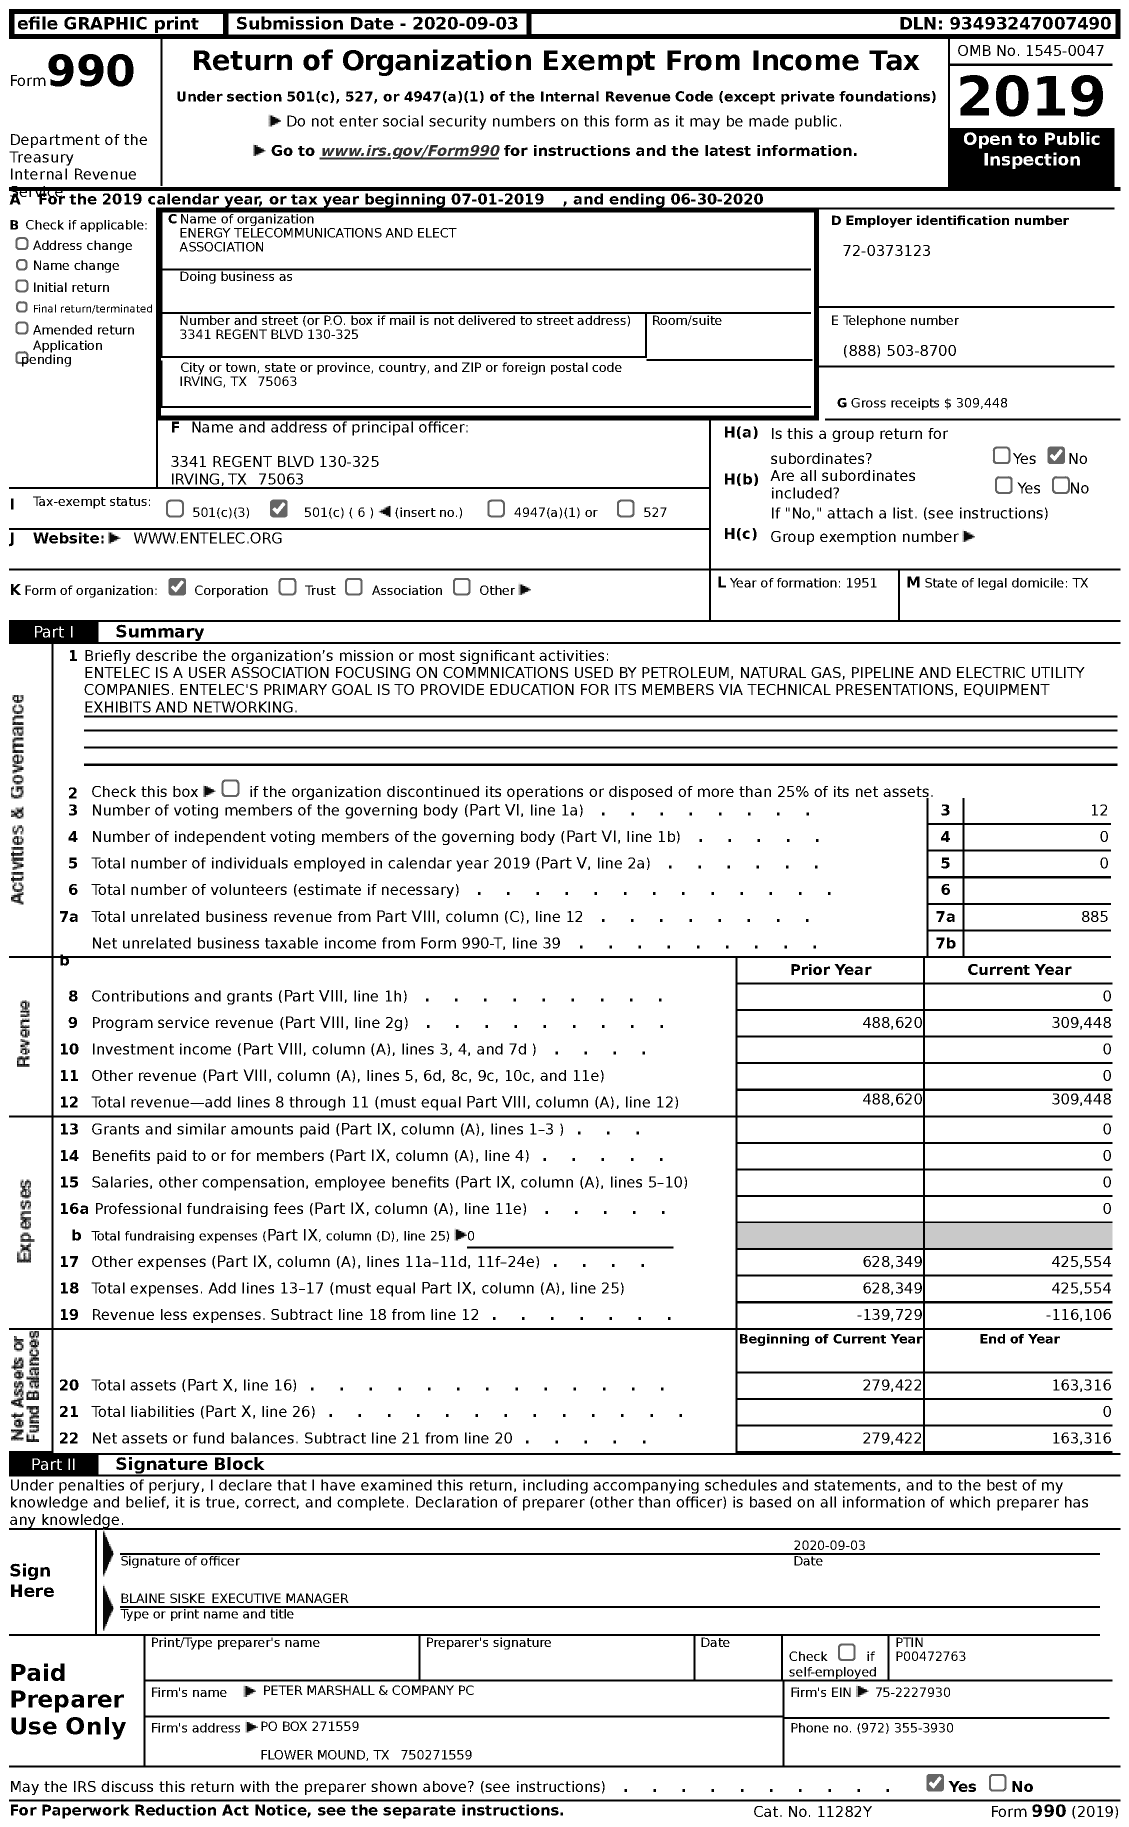 Image of first page of 2019 Form 990 for Energy Telecommunications and Elect Association